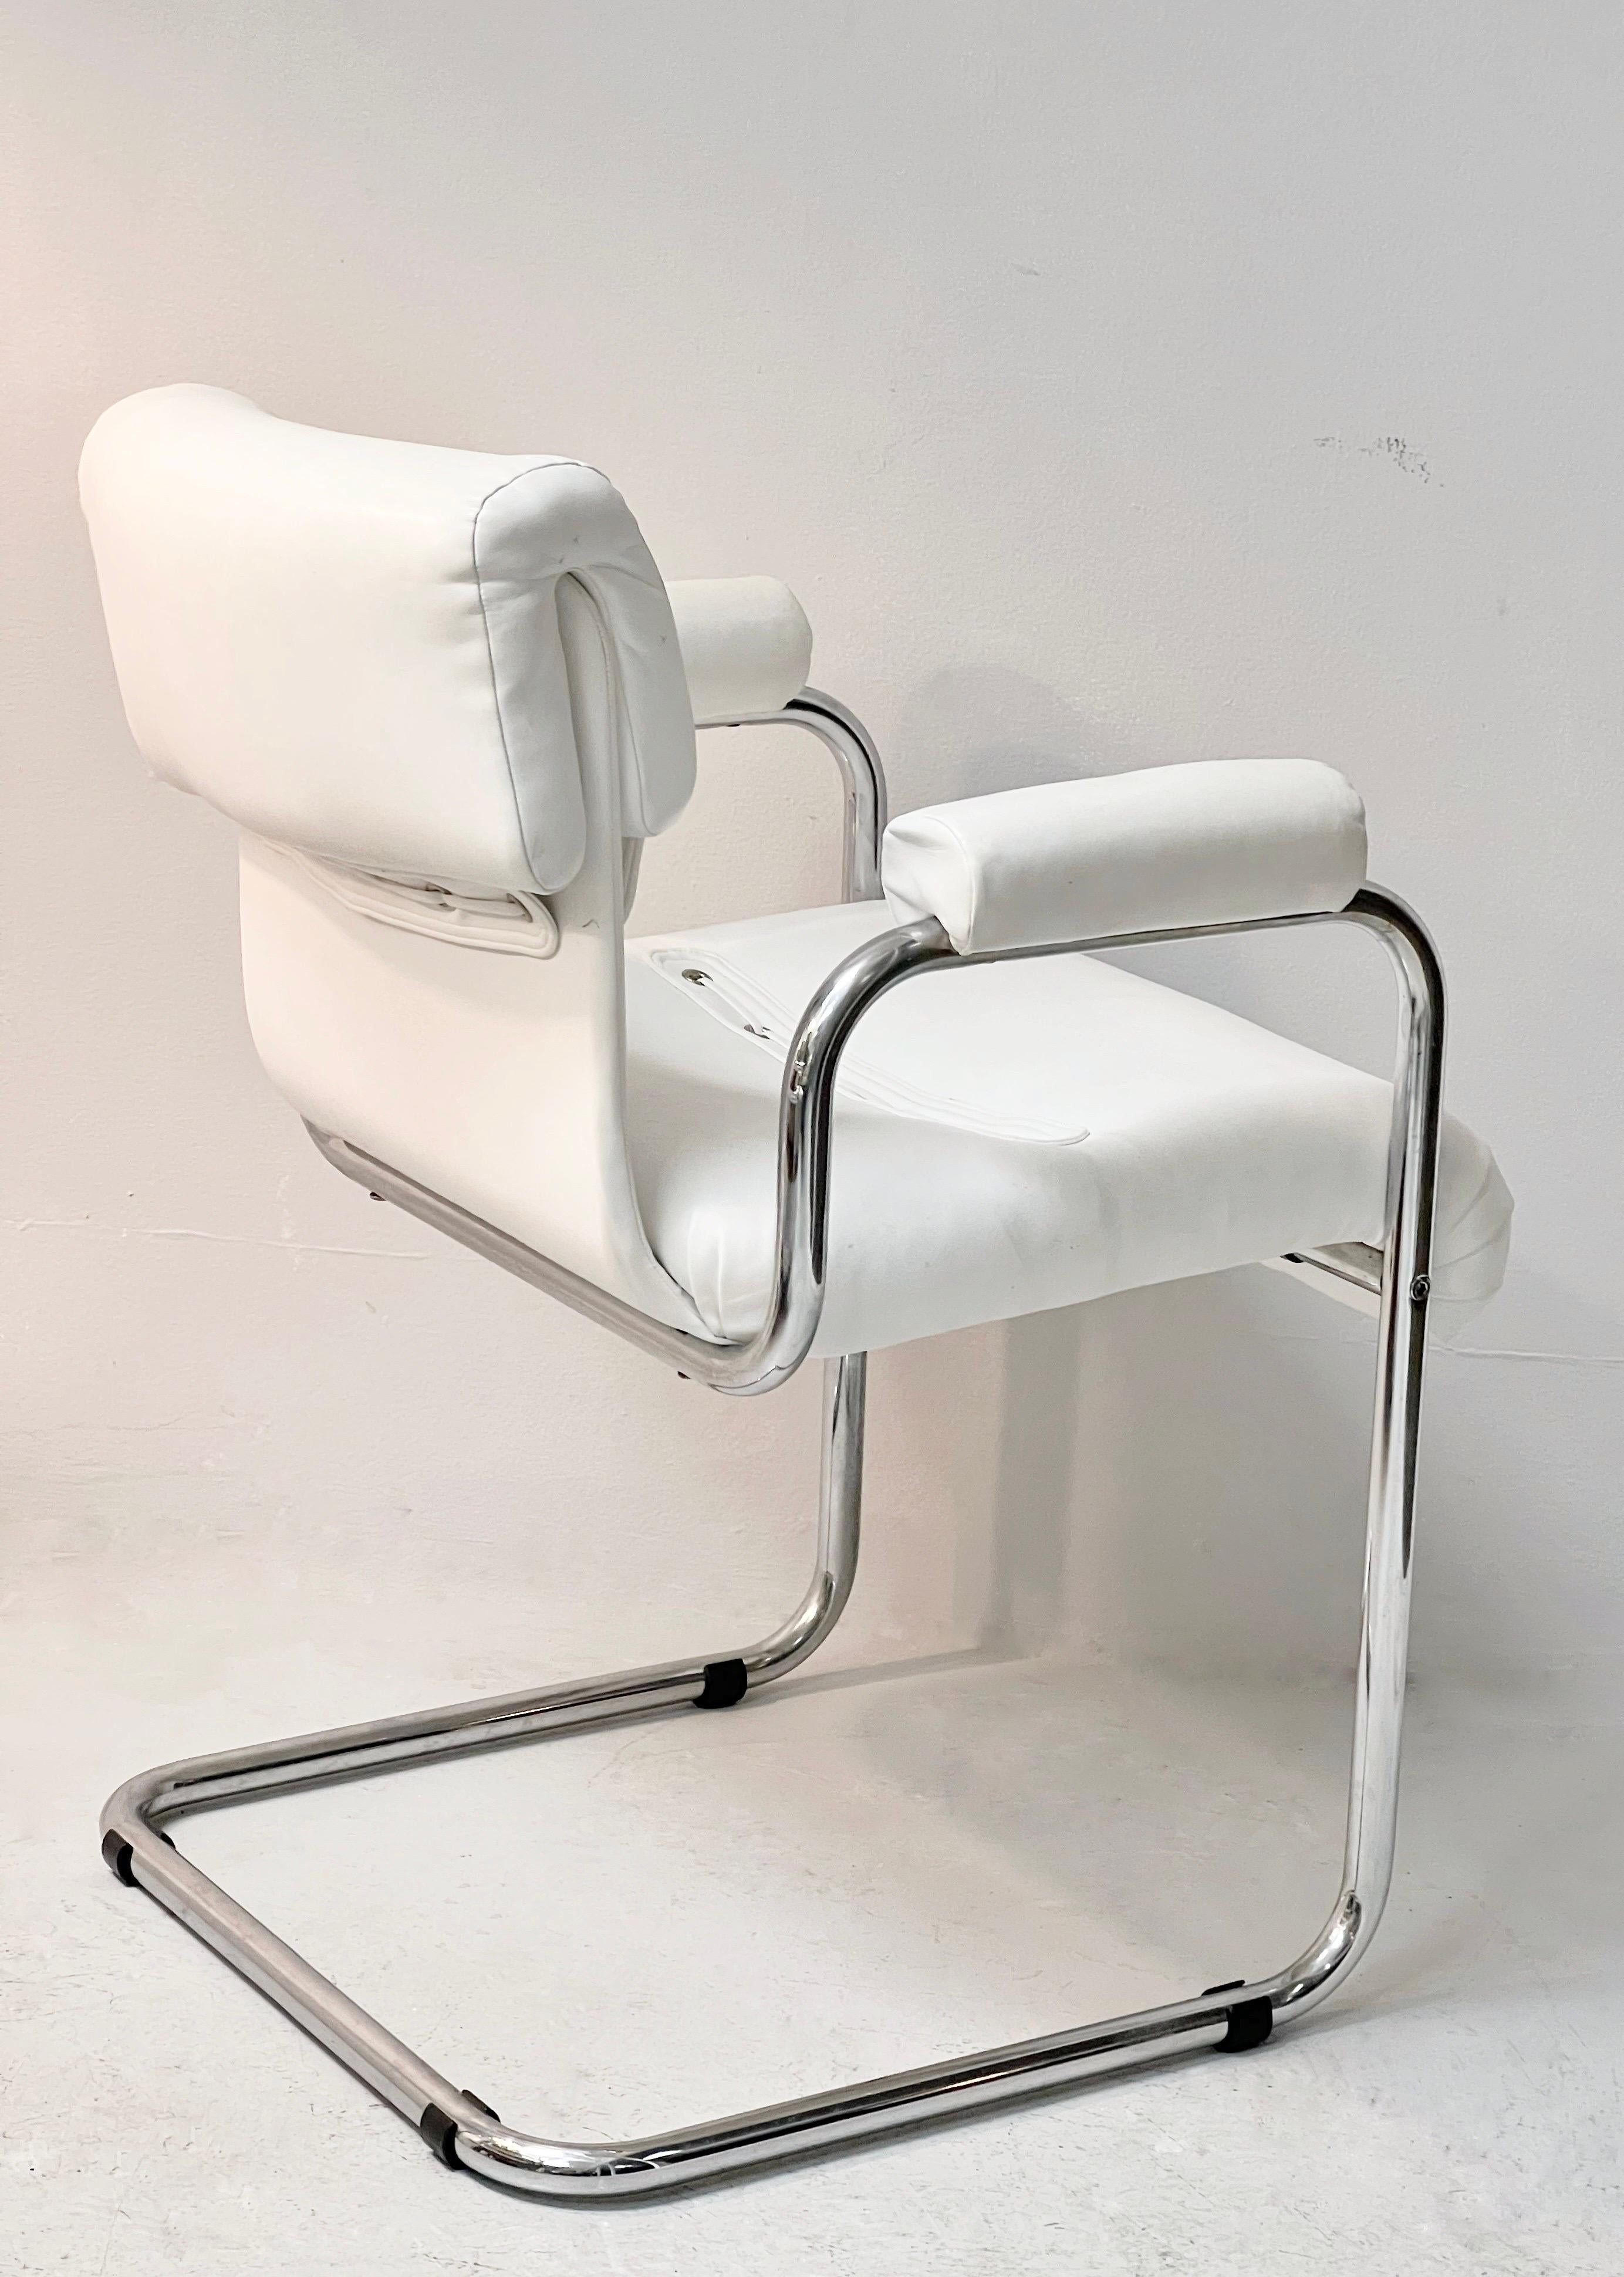 Great looking chairs by Guido Faleschini. A rare find in the original white leather upholstery. Versatile chairs that can be used in any room. 2 available.